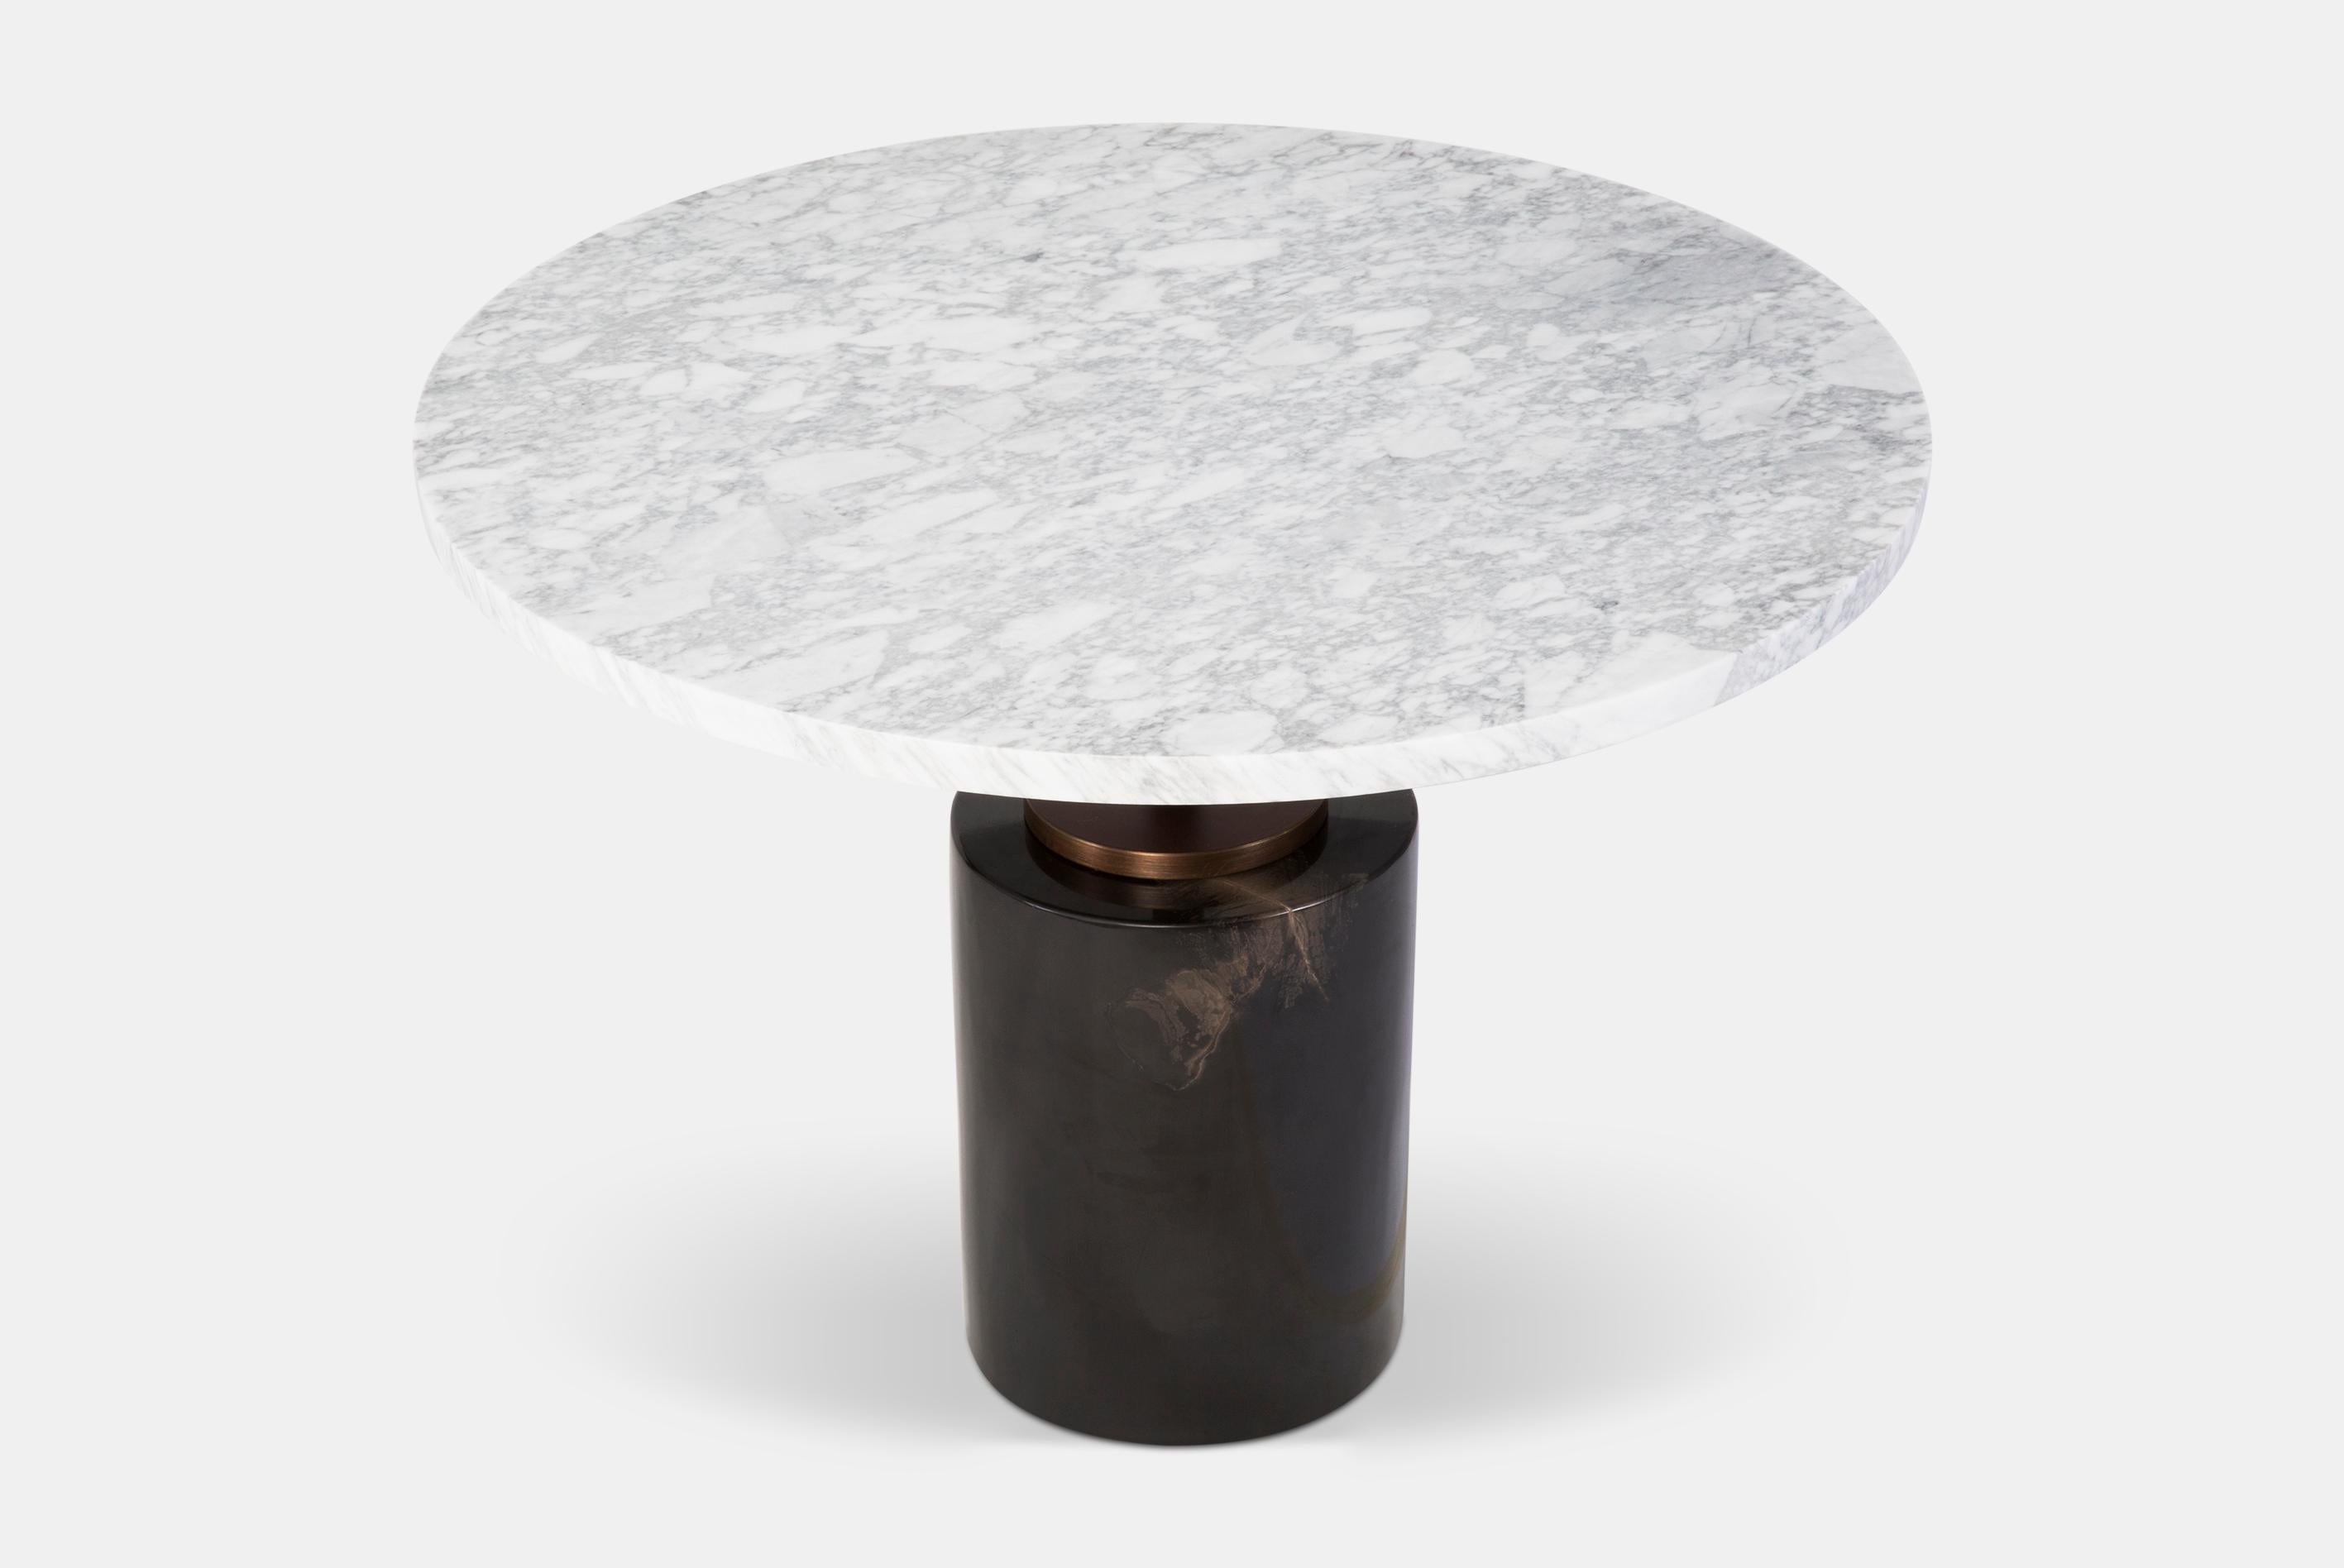 A set of tables that mix different materials. The covers can go up or down to offer flexility. The marble, which despite its coldness, was in the Renaissance era as close to living material, allowed the creation and gave balance to art. A